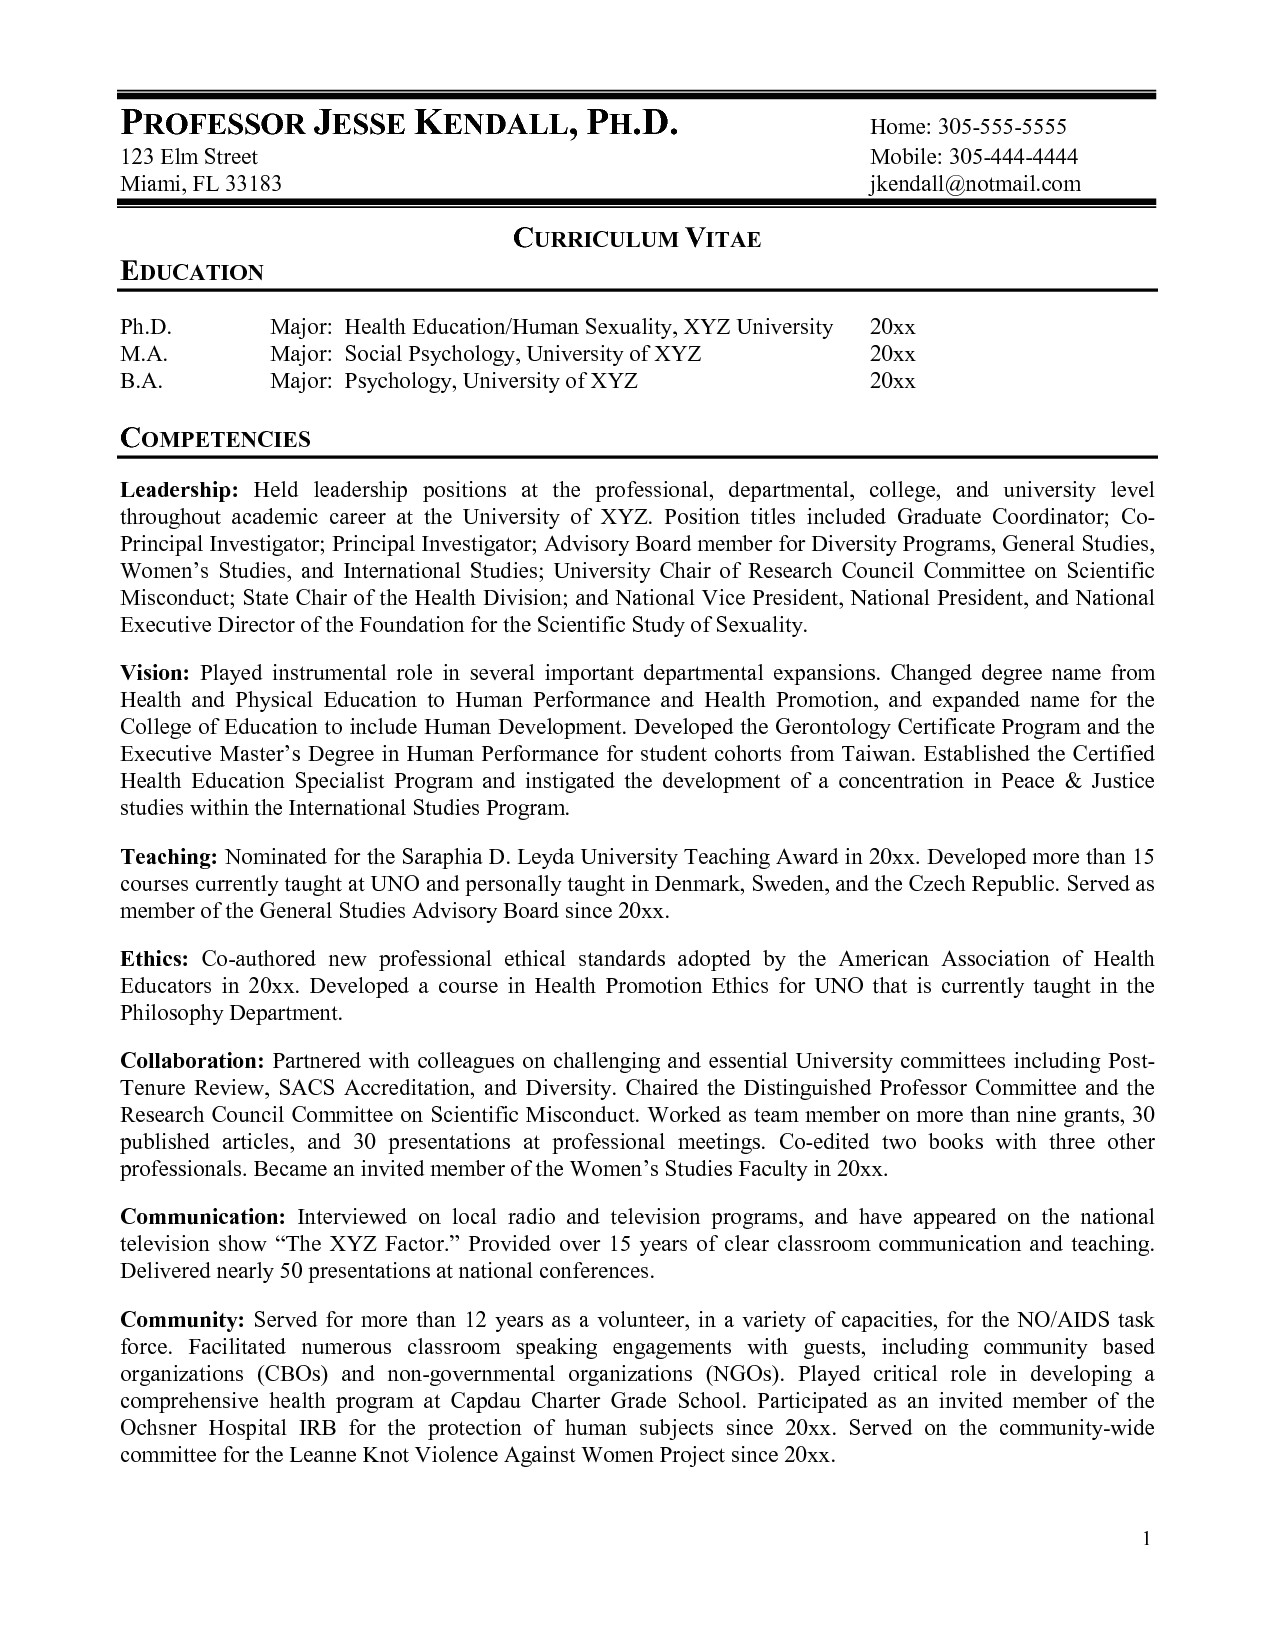 sample resume for faculty position